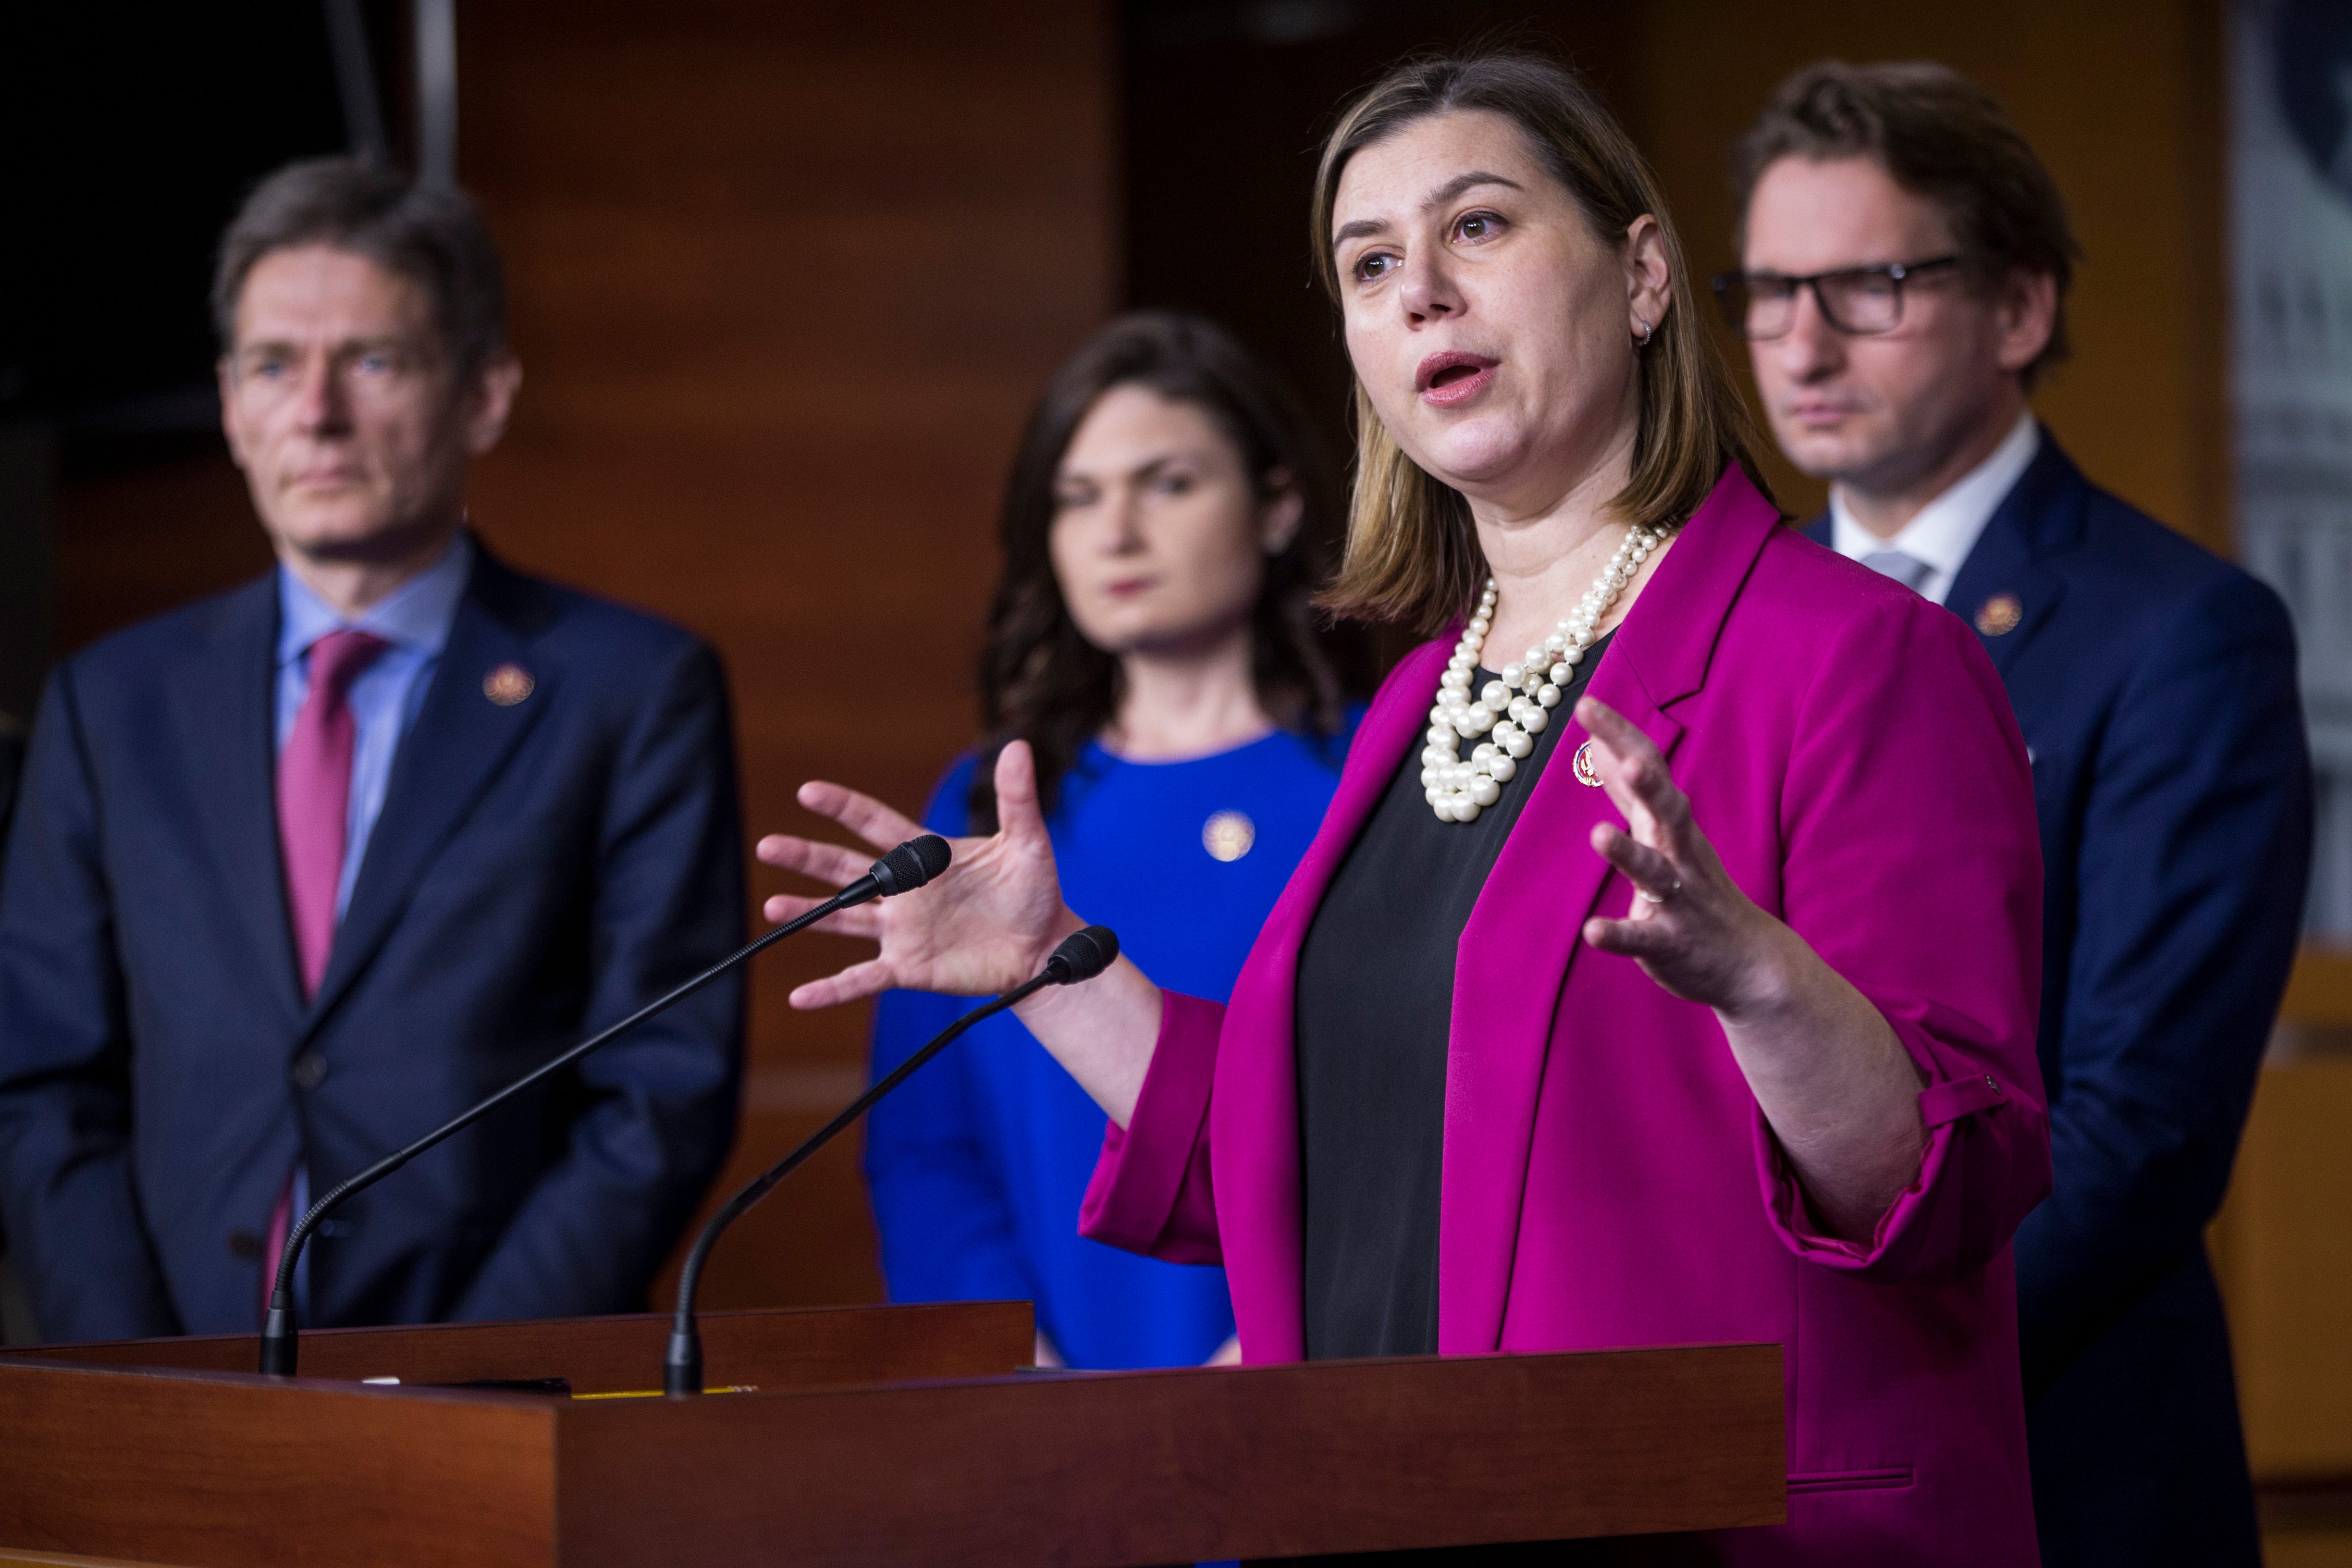 Rep. Elissa Slotkin, D-Holly, introduced with Rep. Elise Stefanik, R-New York, a bill that addresses Russian influence in social media, television or radio ads.